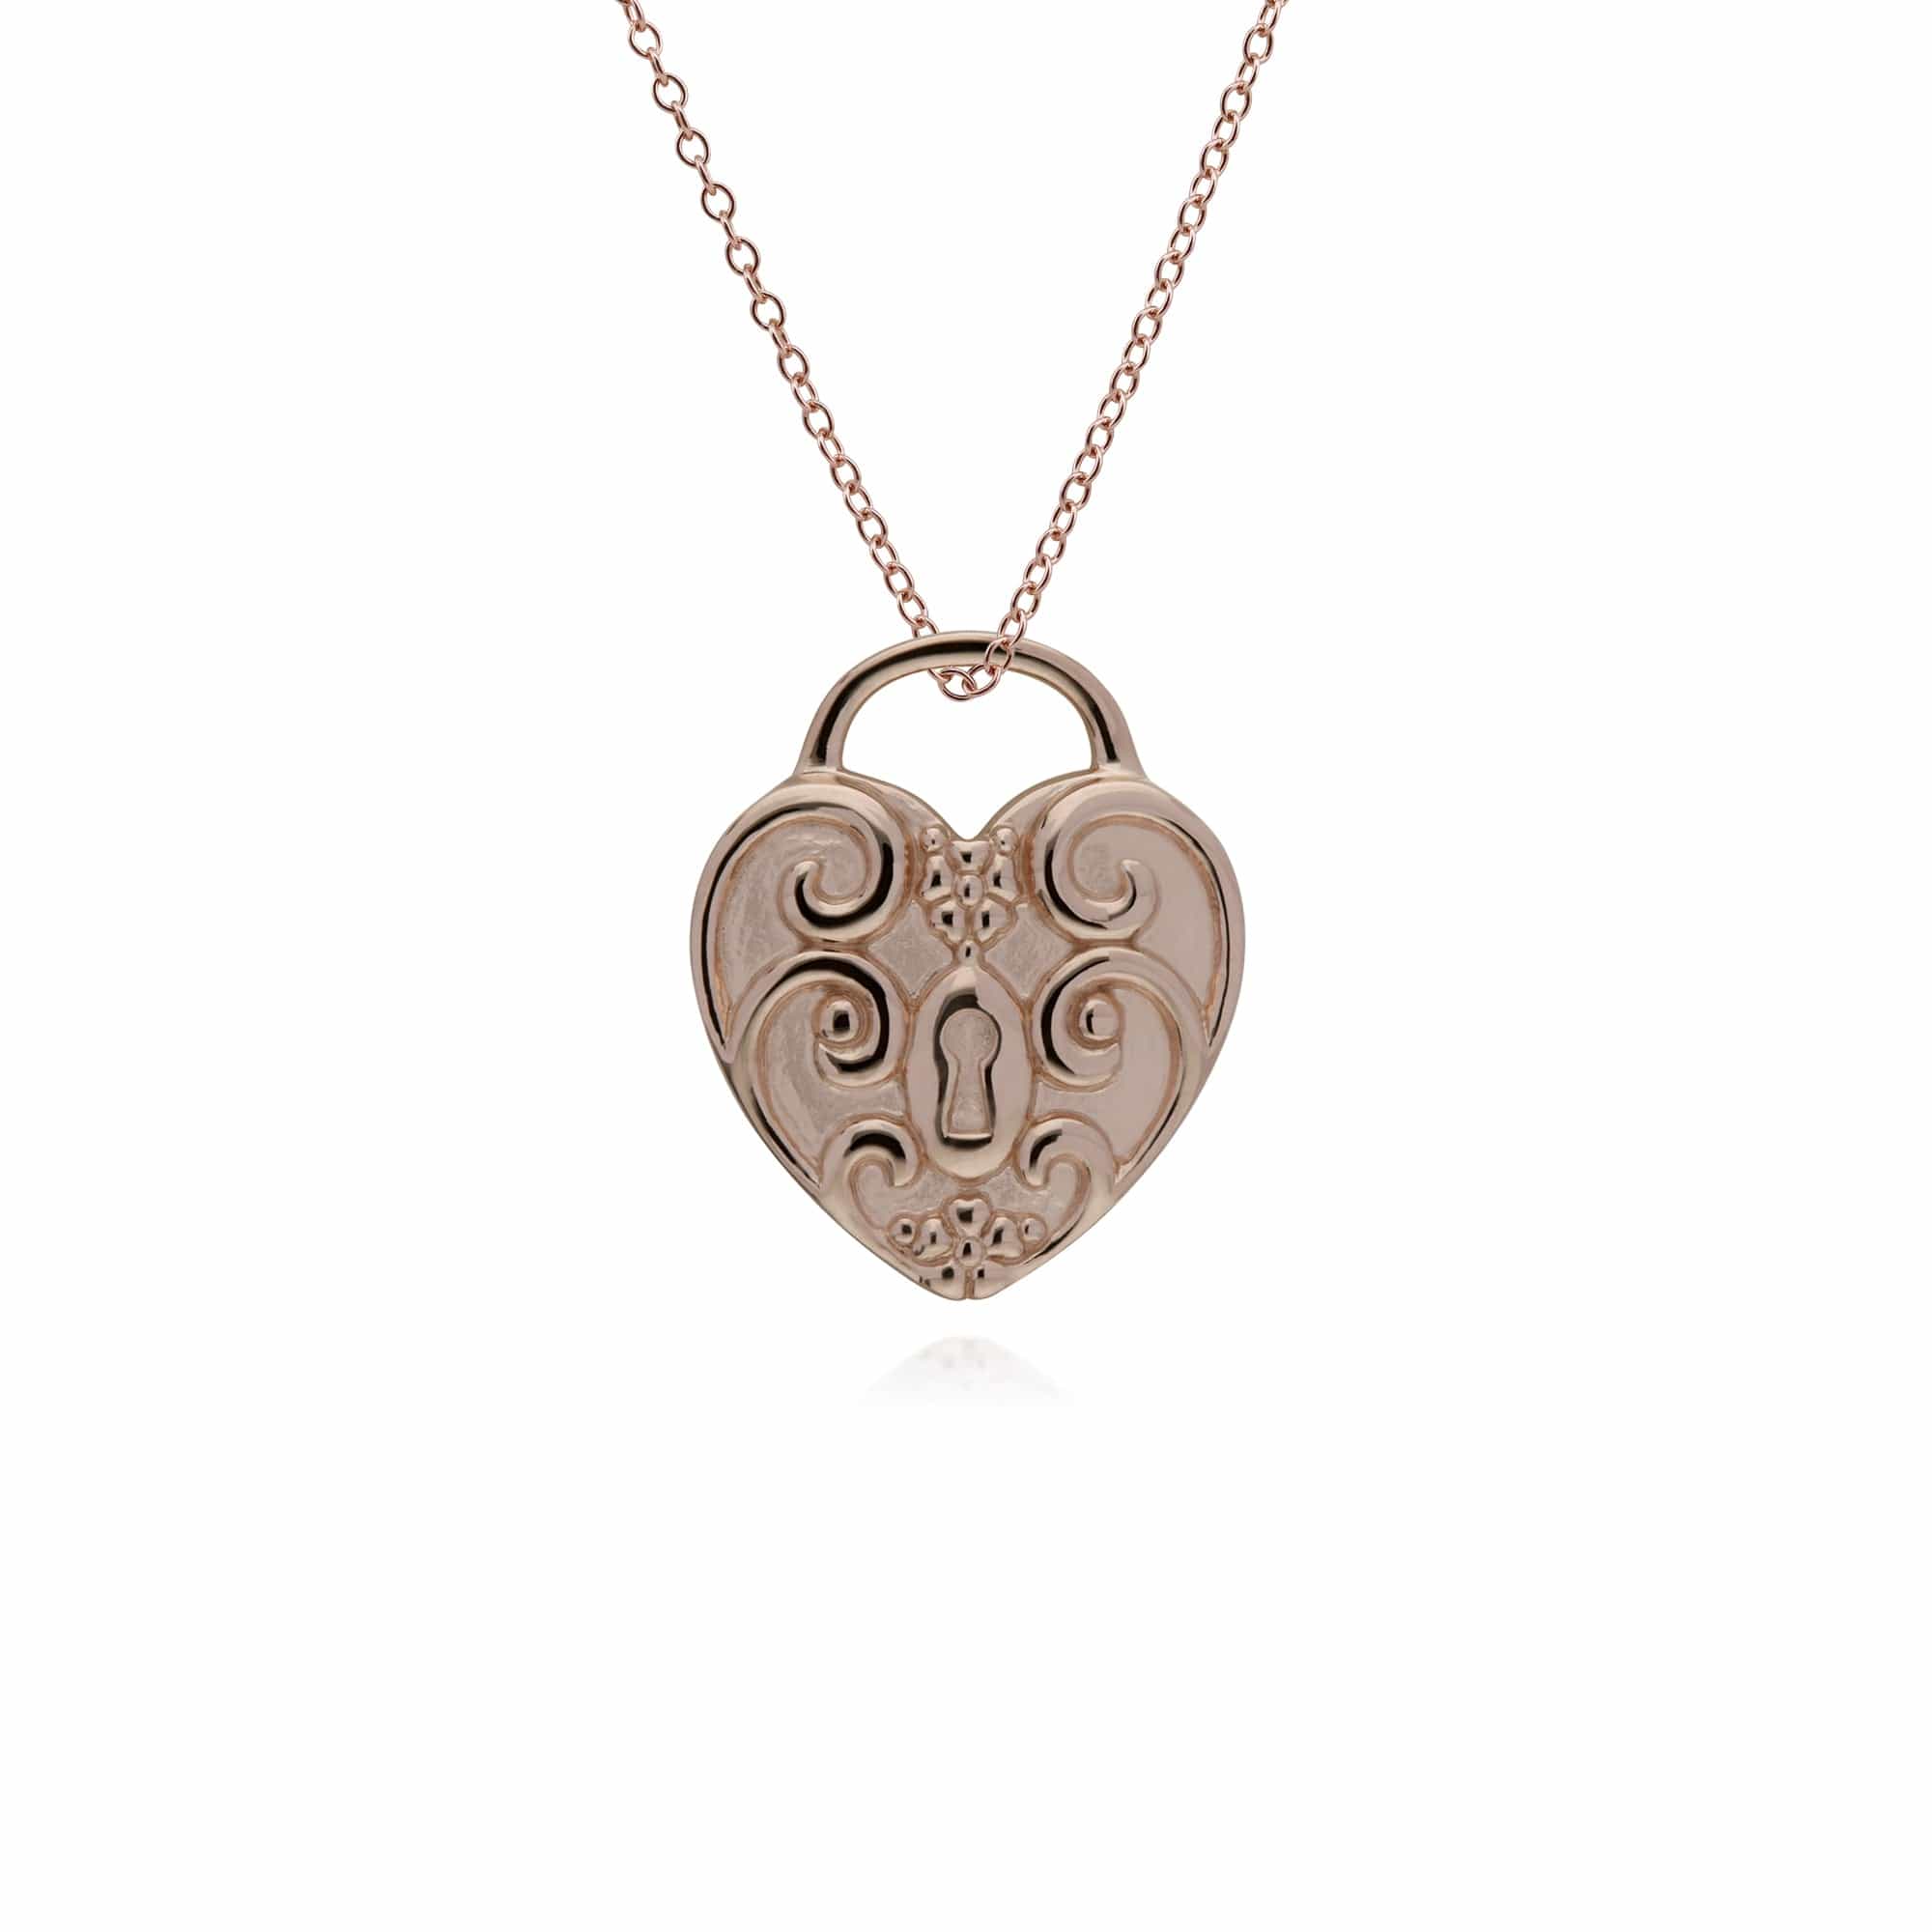 270P026714925-270P026501925 Classic Swirl Heart Lock Pendant & Turquoise Big Key Charm in Rose Gold Plated 925 Sterling Silver 3